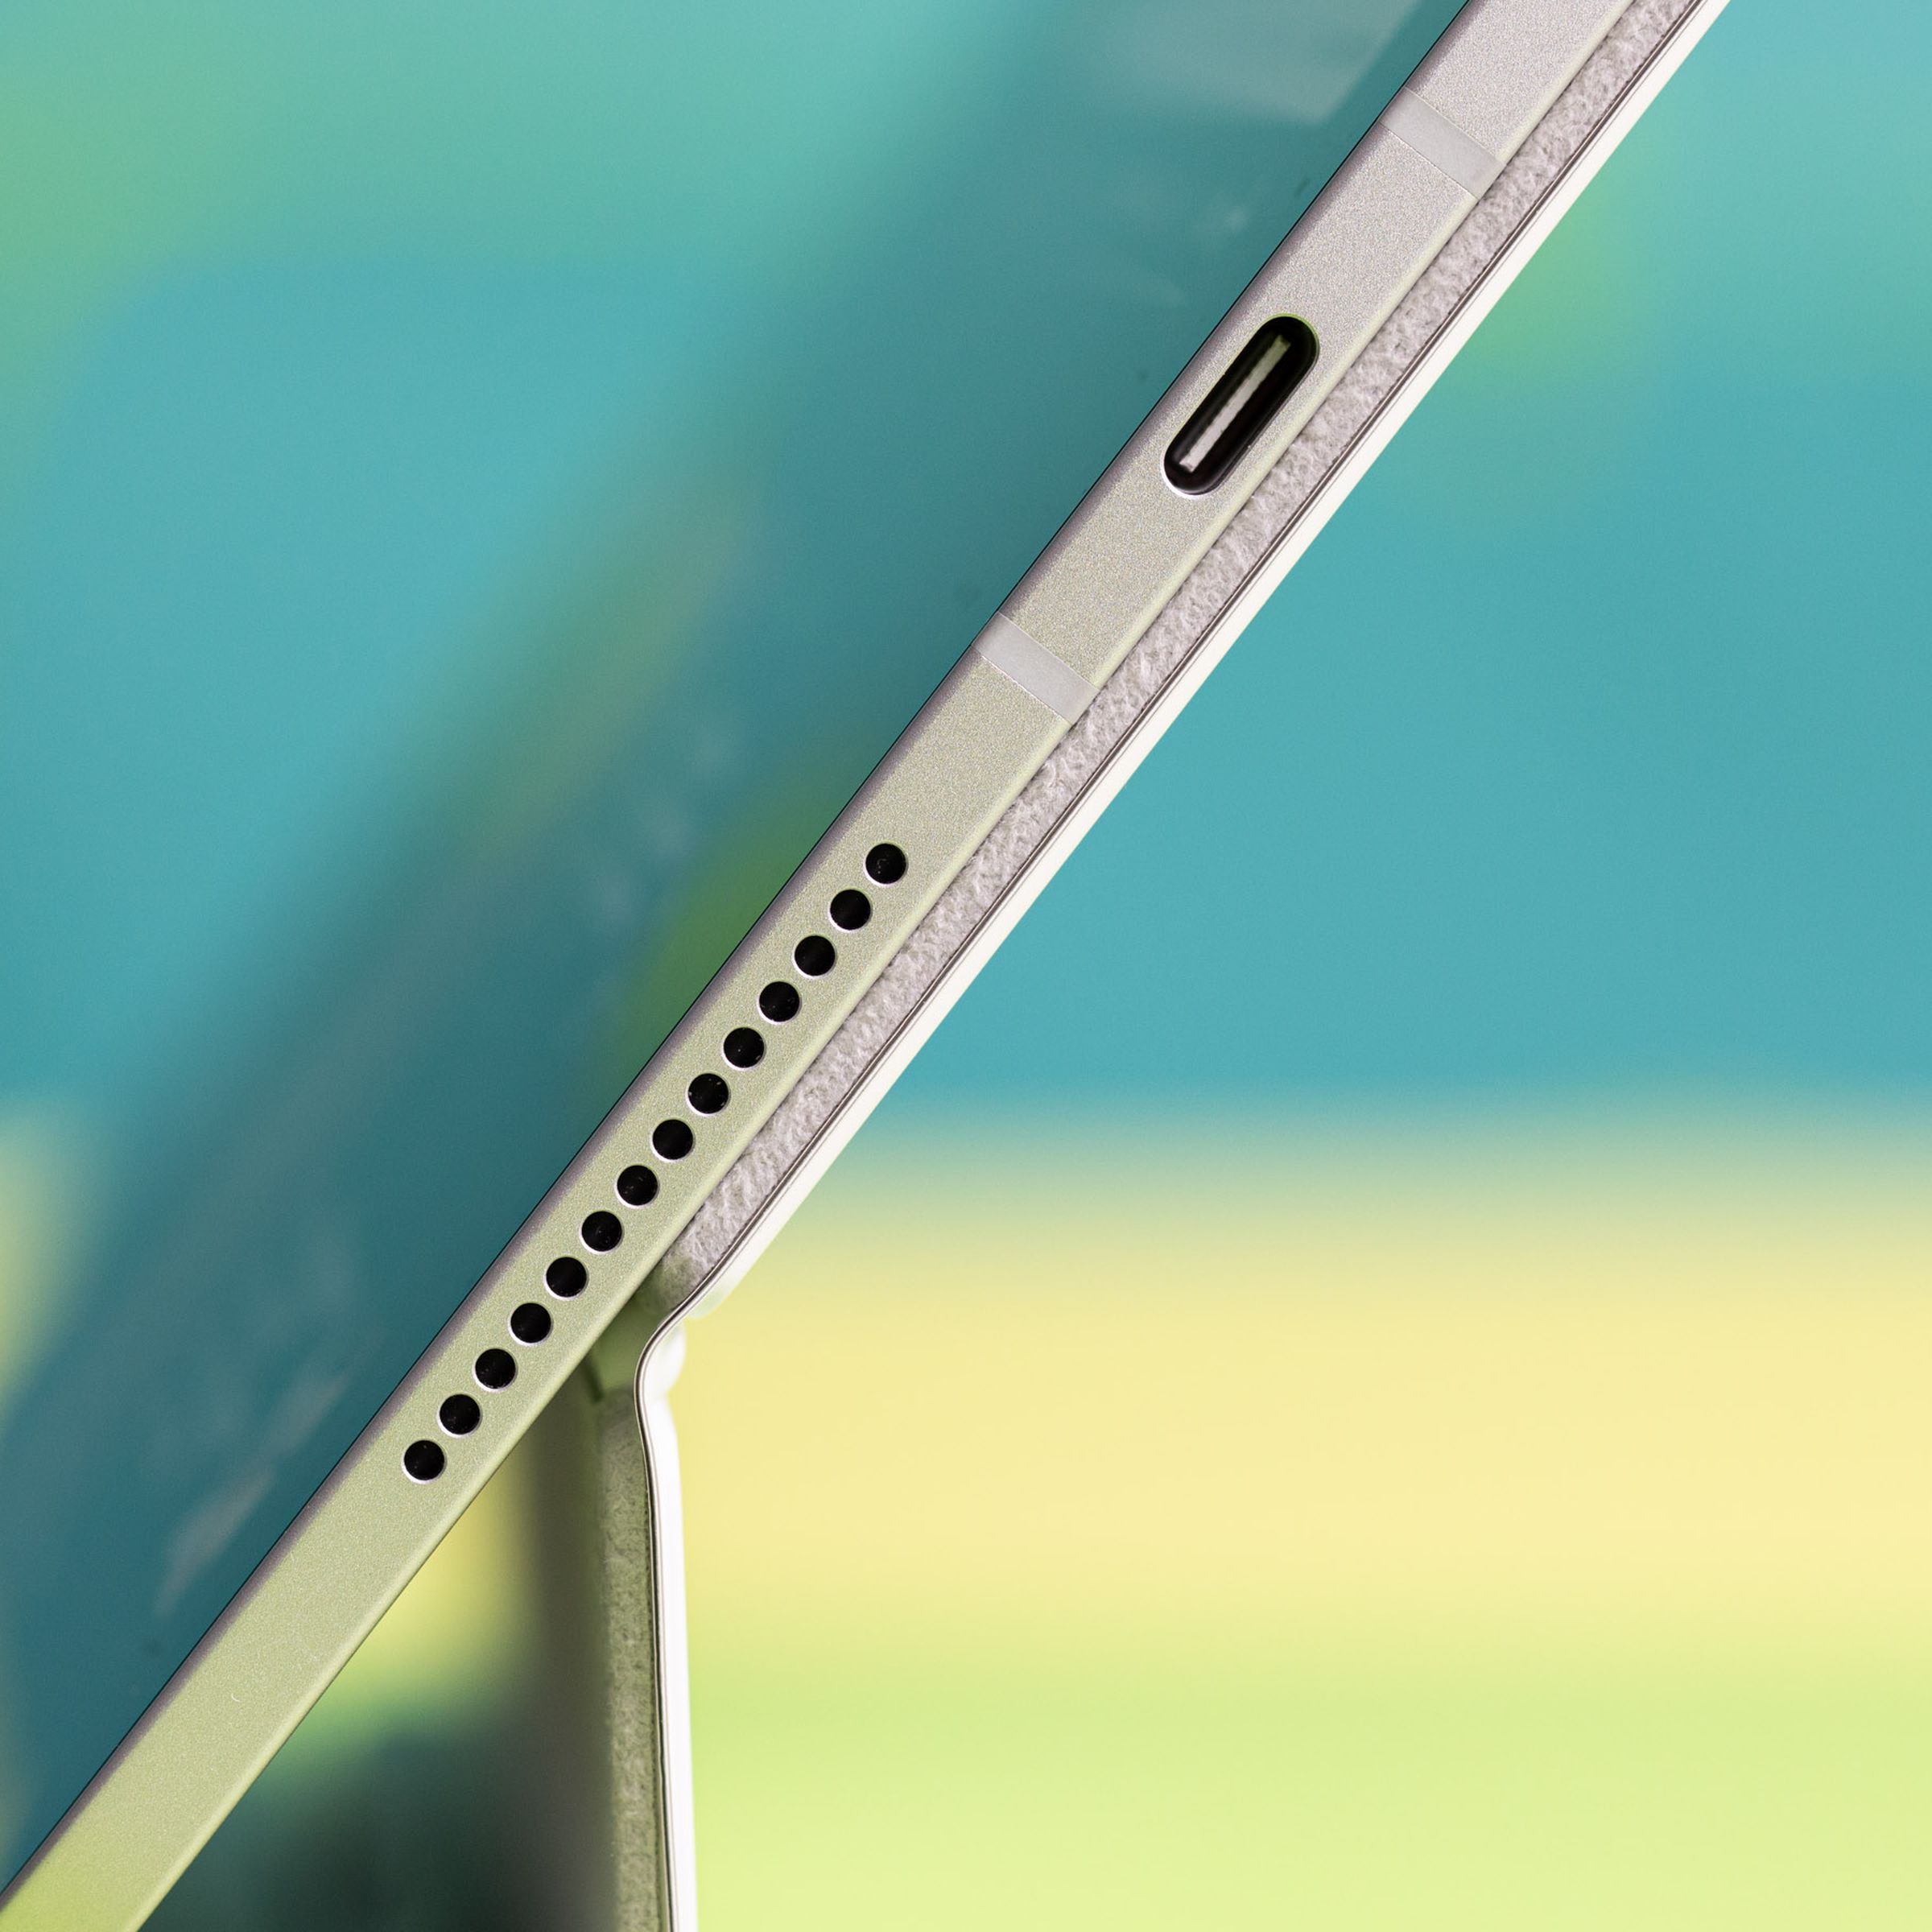 A photo of the edge of an iPad Pro, showing the speaker and USB-C port.